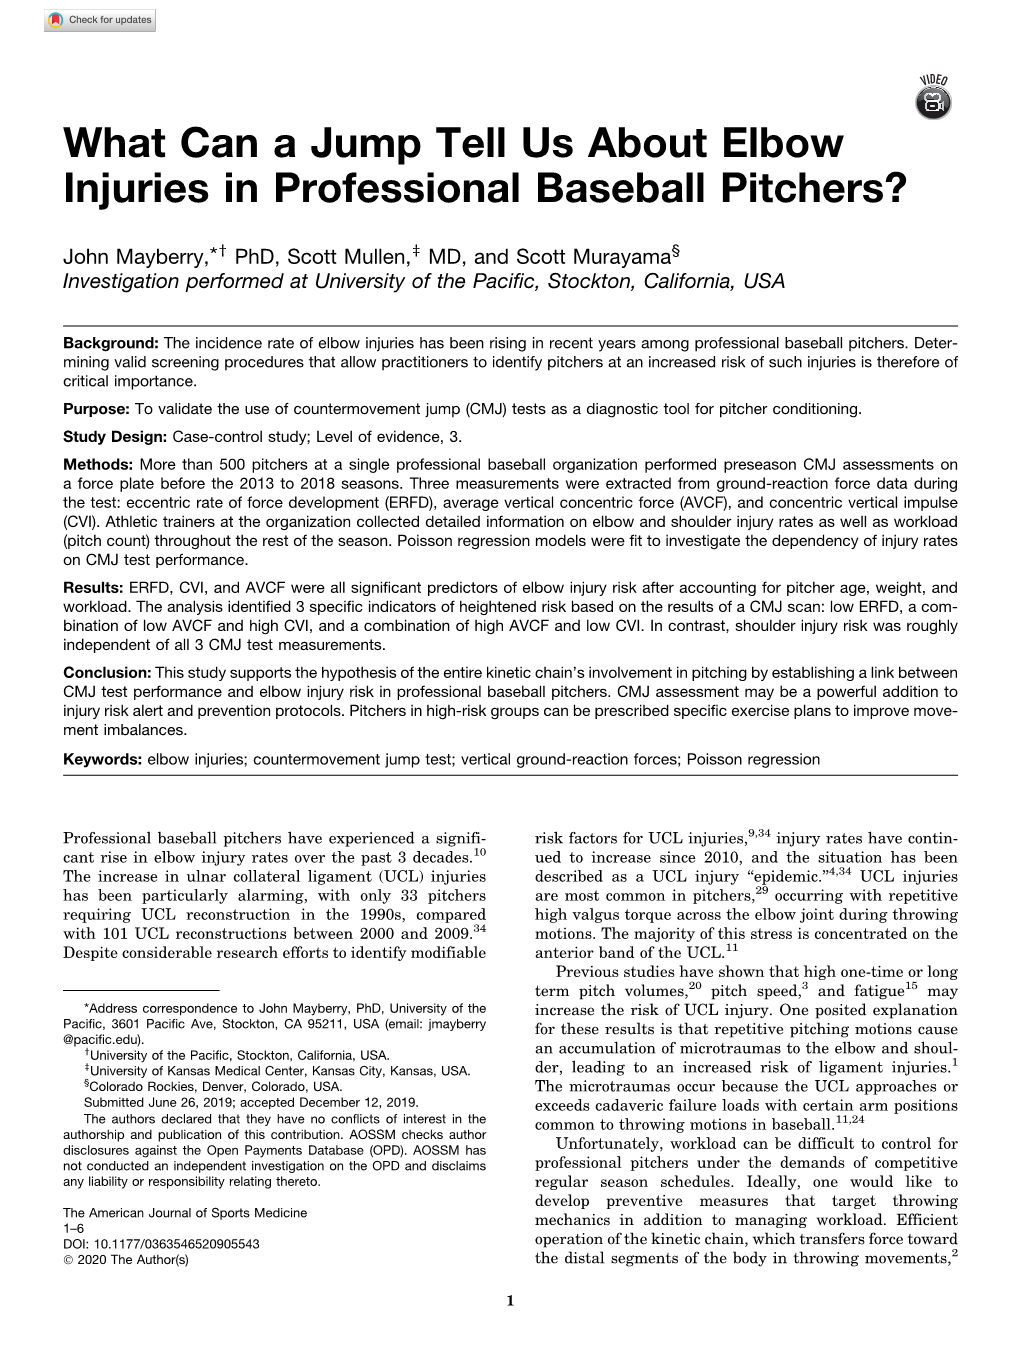 What Can a Jump Tell Us About Elbow Injuries in Professional Baseball Pitchers?